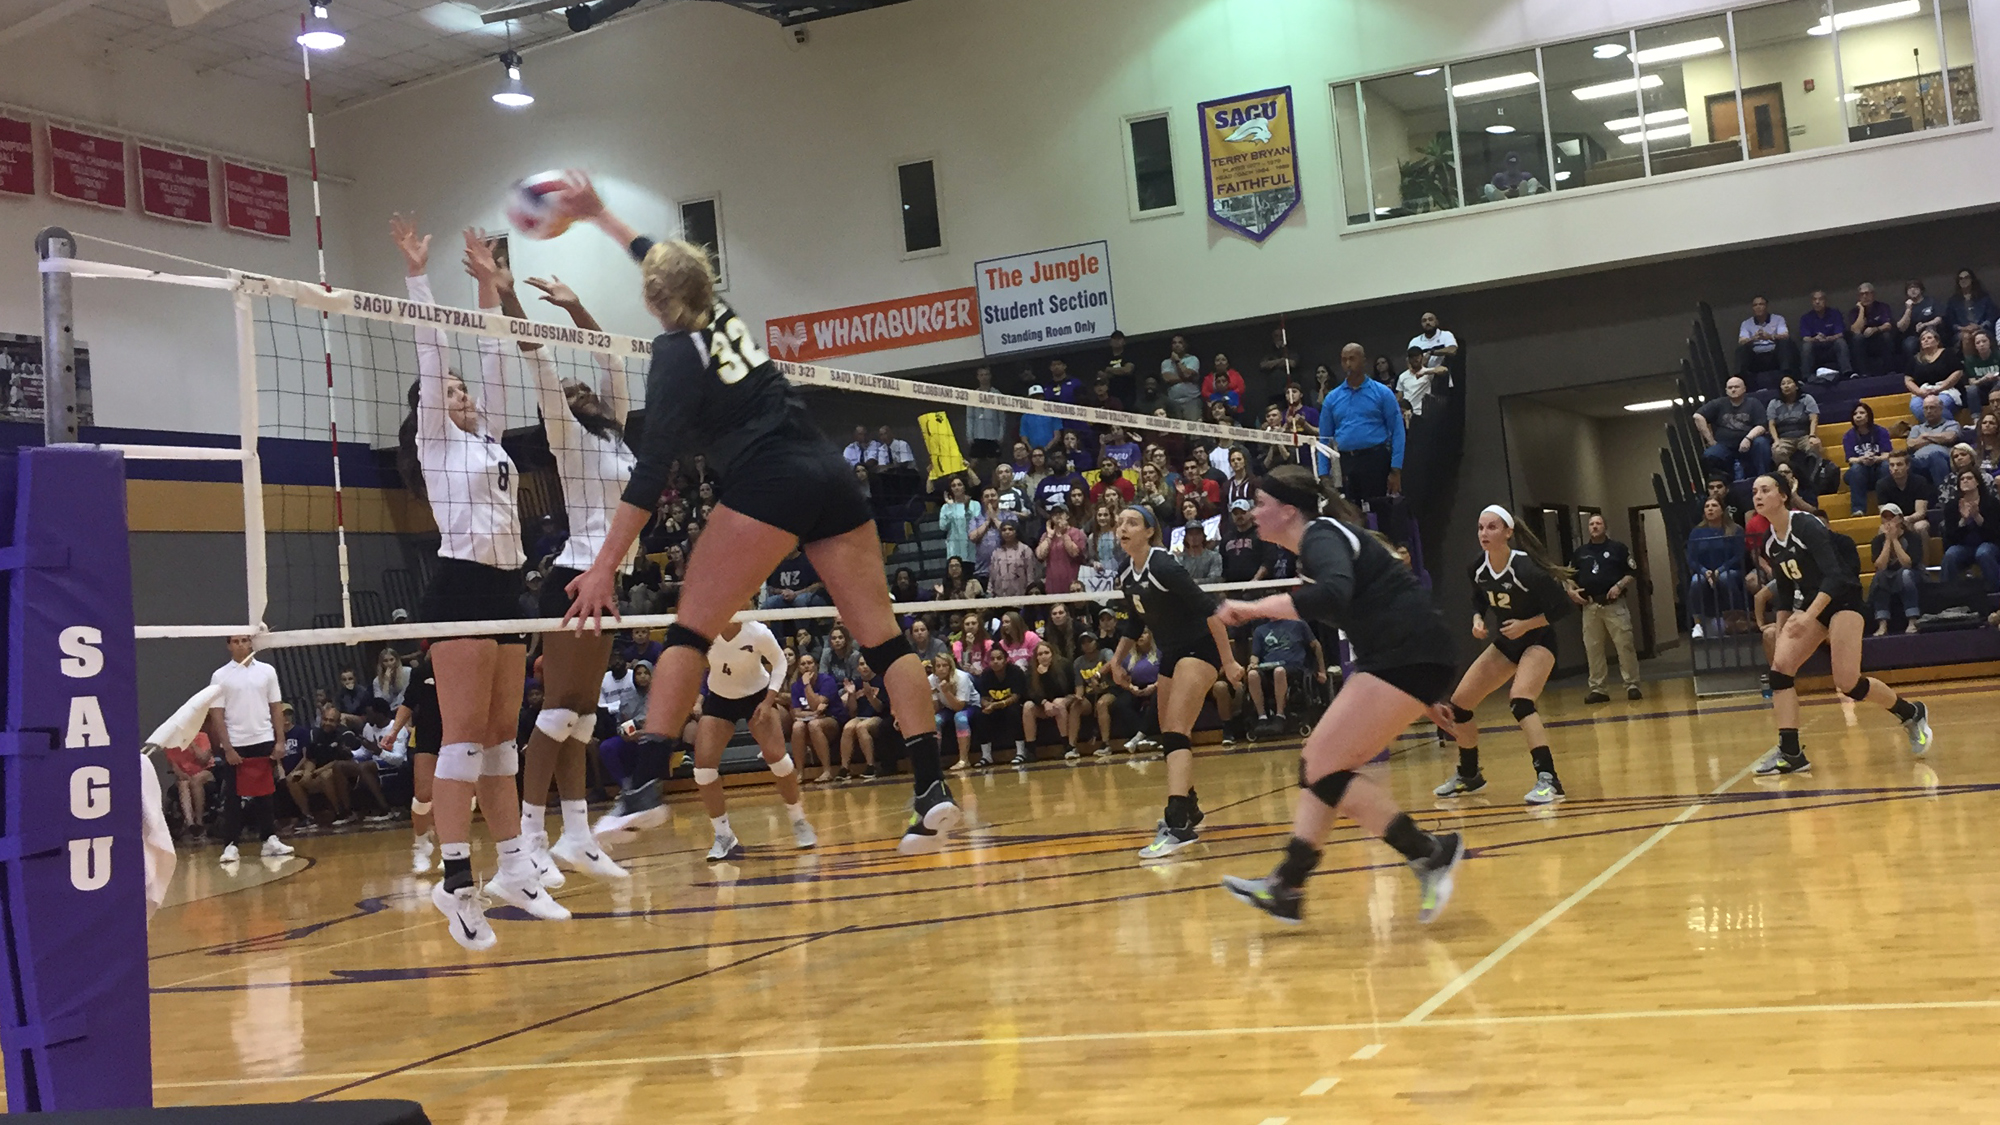 Missed chances, lost leads cost volleyball first place in matchup of ...